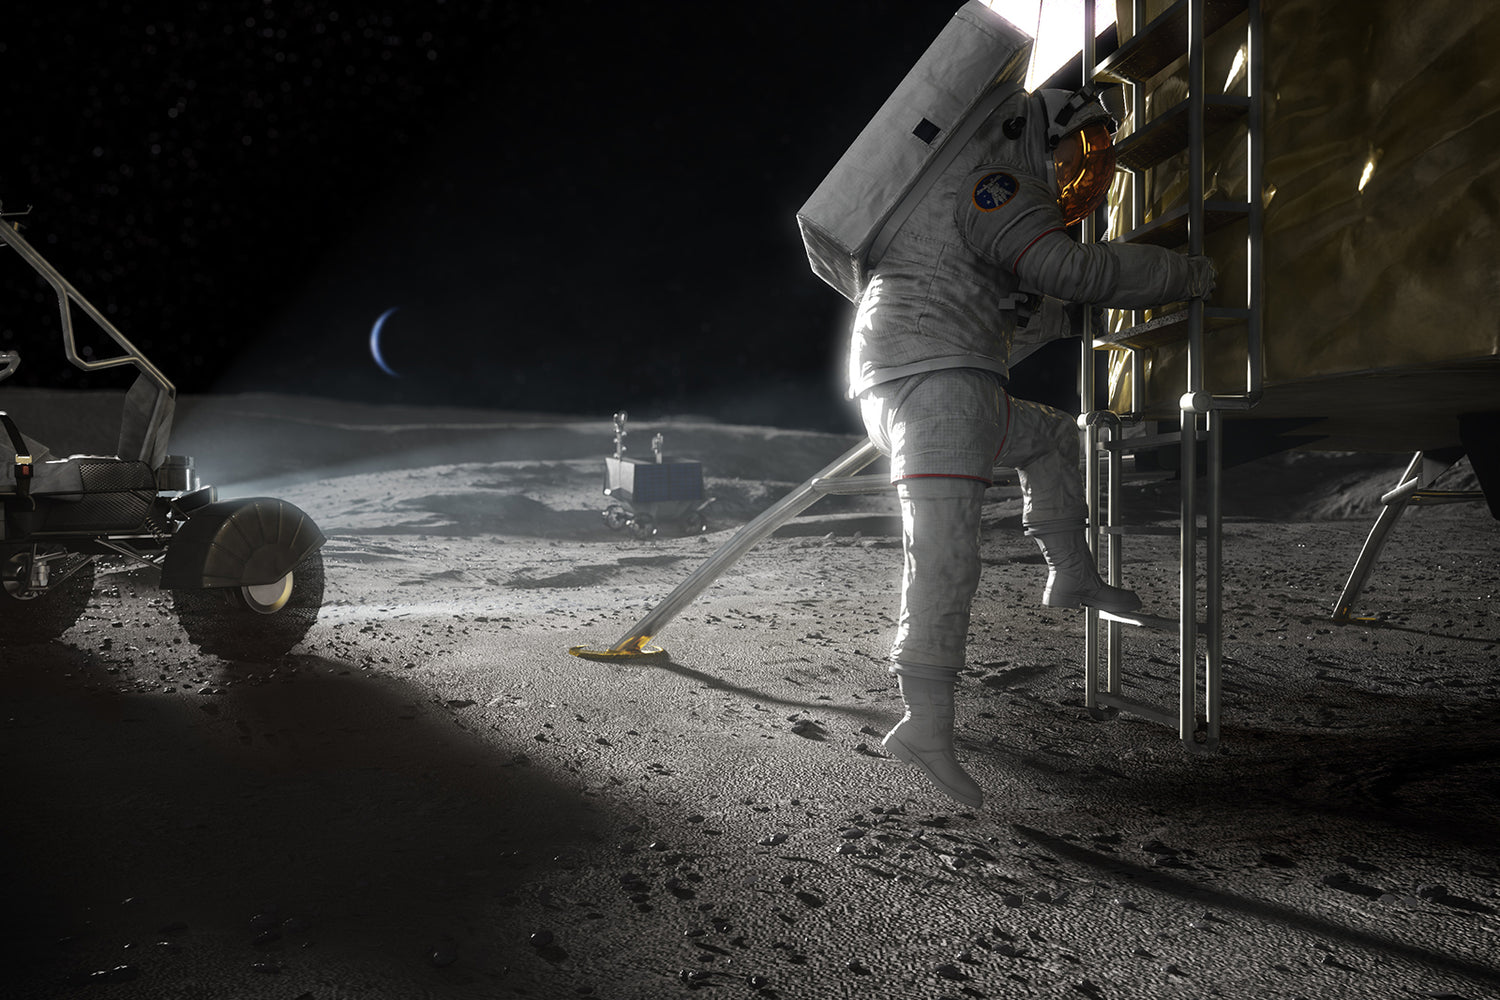 NASA Administrator Says Congress Wants The Agency To Select Additional Companies To Conduct At Least 10 Astronaut Missions To The Moon